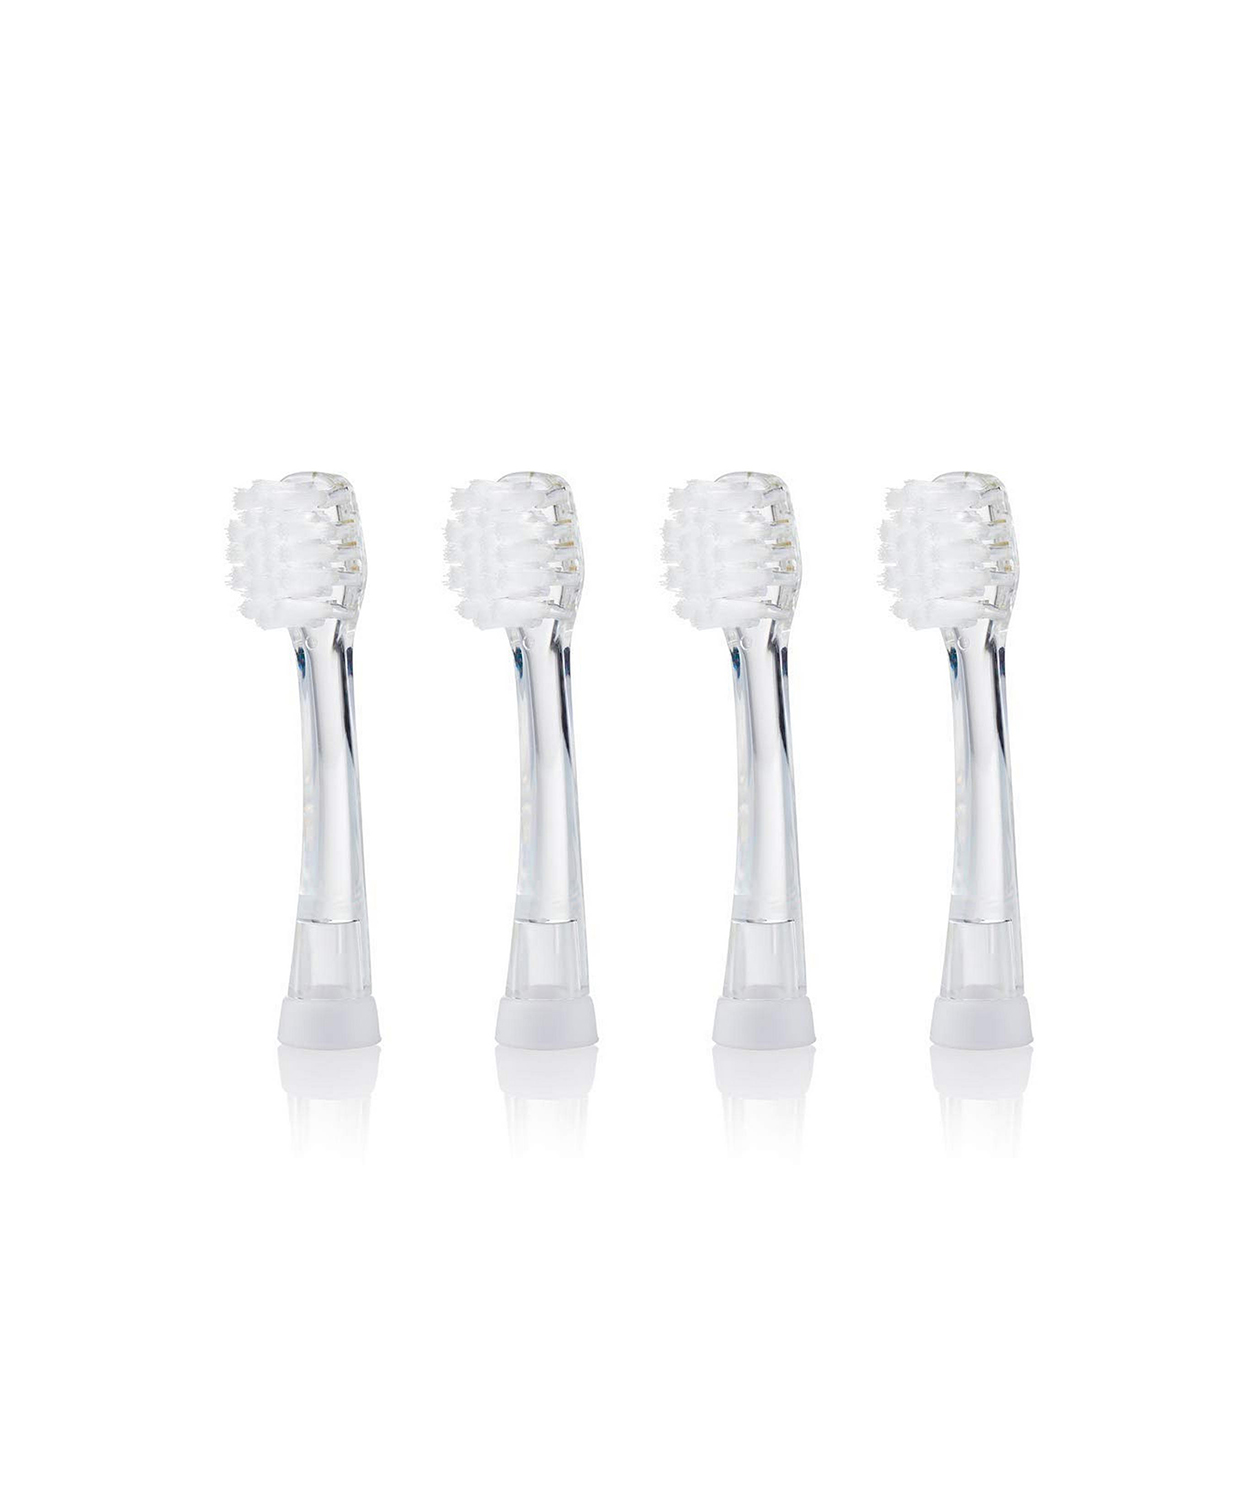 BabySonic Replacement Brush heads 18-36mths (Pack of 4)